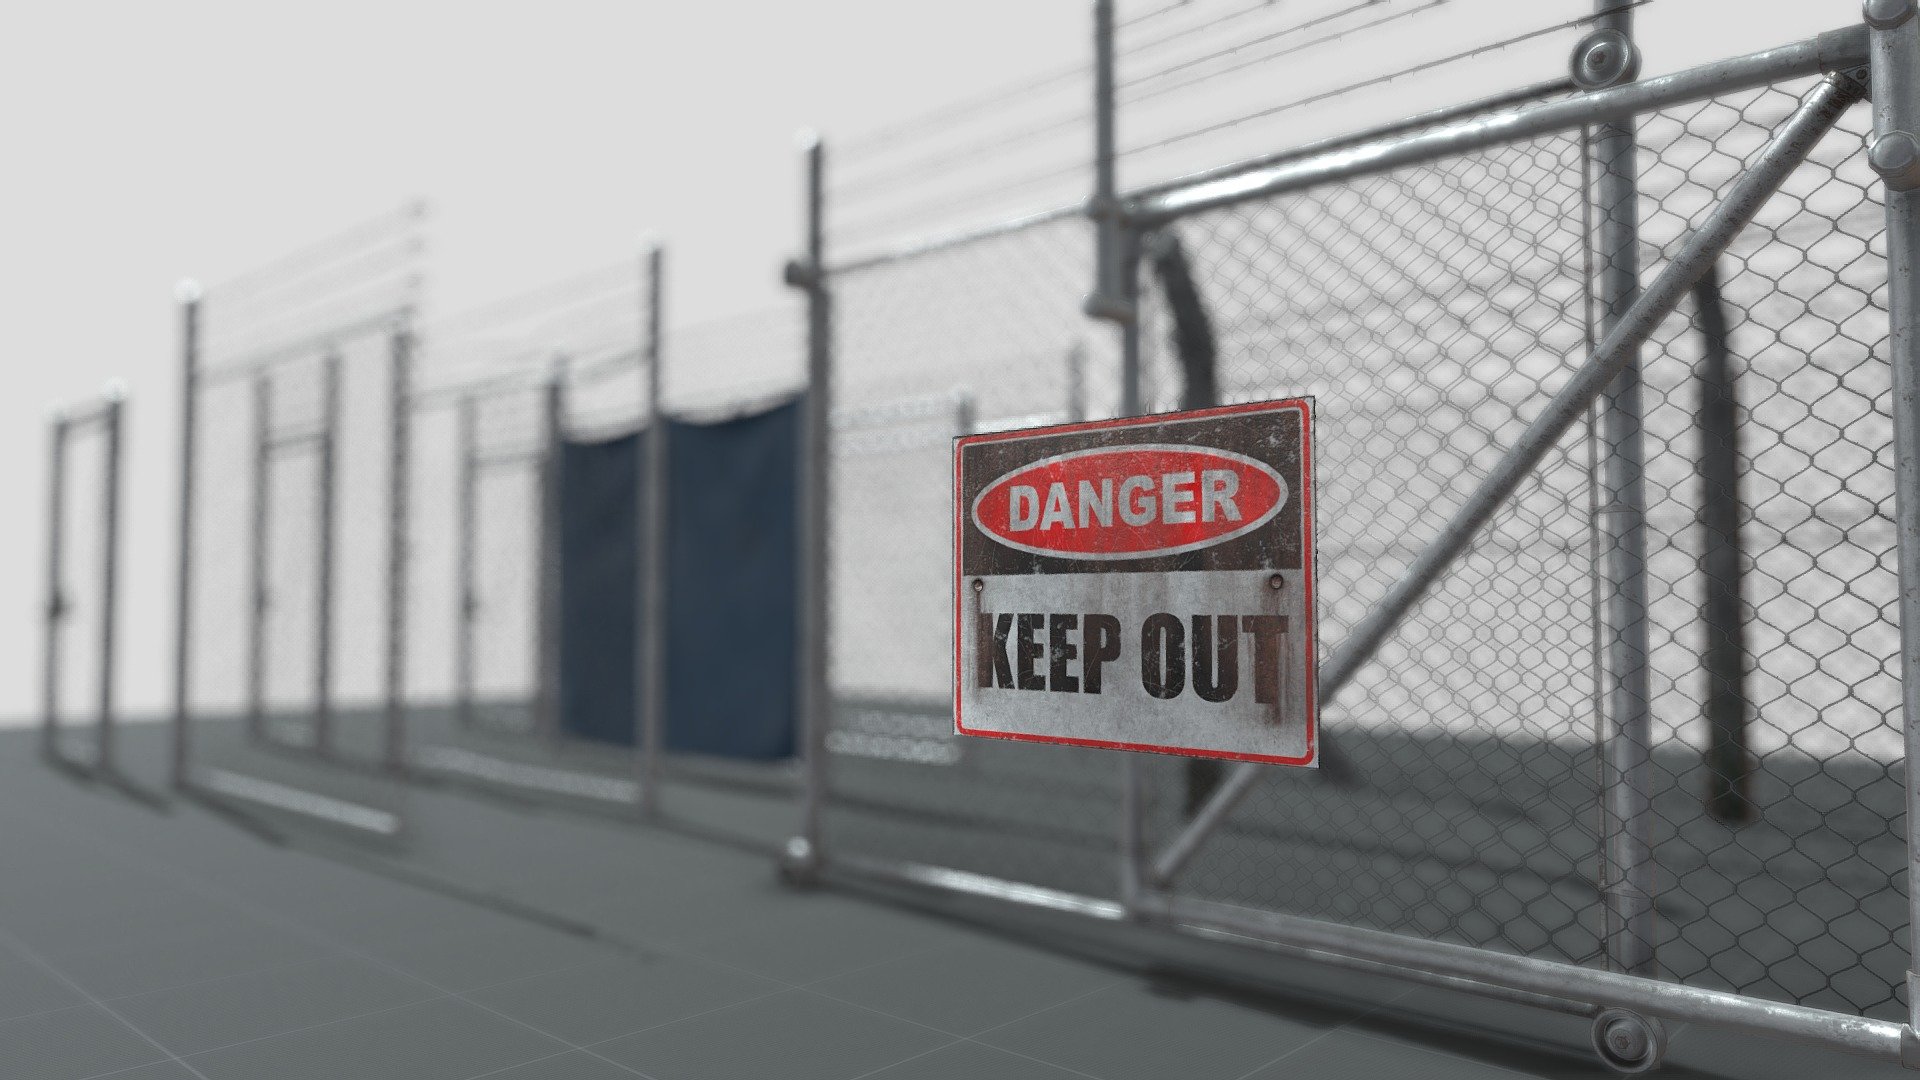 Modular fences pack;

Pack of low poly models for unity or unreal 

Includes:
* 5 metal fences.
* 5 metal fence door.
* 2 fence gate.
* 3 old fences with concrete posts.
* 1 concrete post.
* 1 sign .

PBR-materials:
* metal fence:4k-Albedo, Normal, AO, Roughness, Metallic.
* chainlink:2k-Albedo, Normal, AO, Roughness, Metallic; +alpha mask in albedo.
* barber wire:1k-Albedo, Normal, AO, Roughness, Metallic; +alpha mask in albedo.
* tarpaulin:2k-Albedo, Normal, AO, Roughness, Metallic.
* concrete post:2k-Albedo, Normal, AO, Roughness, Metallic.
* metal rust:1k-Albedo, Normal, AO, Roughness, Metallic.
* edges:2k-Albedo, Normal, AO, Roughness, Metallic; + variants.

 - Modular Fences - Buy Royalty Free 3D model by 3D_IgnacioArt (@ig.percara) 3d model